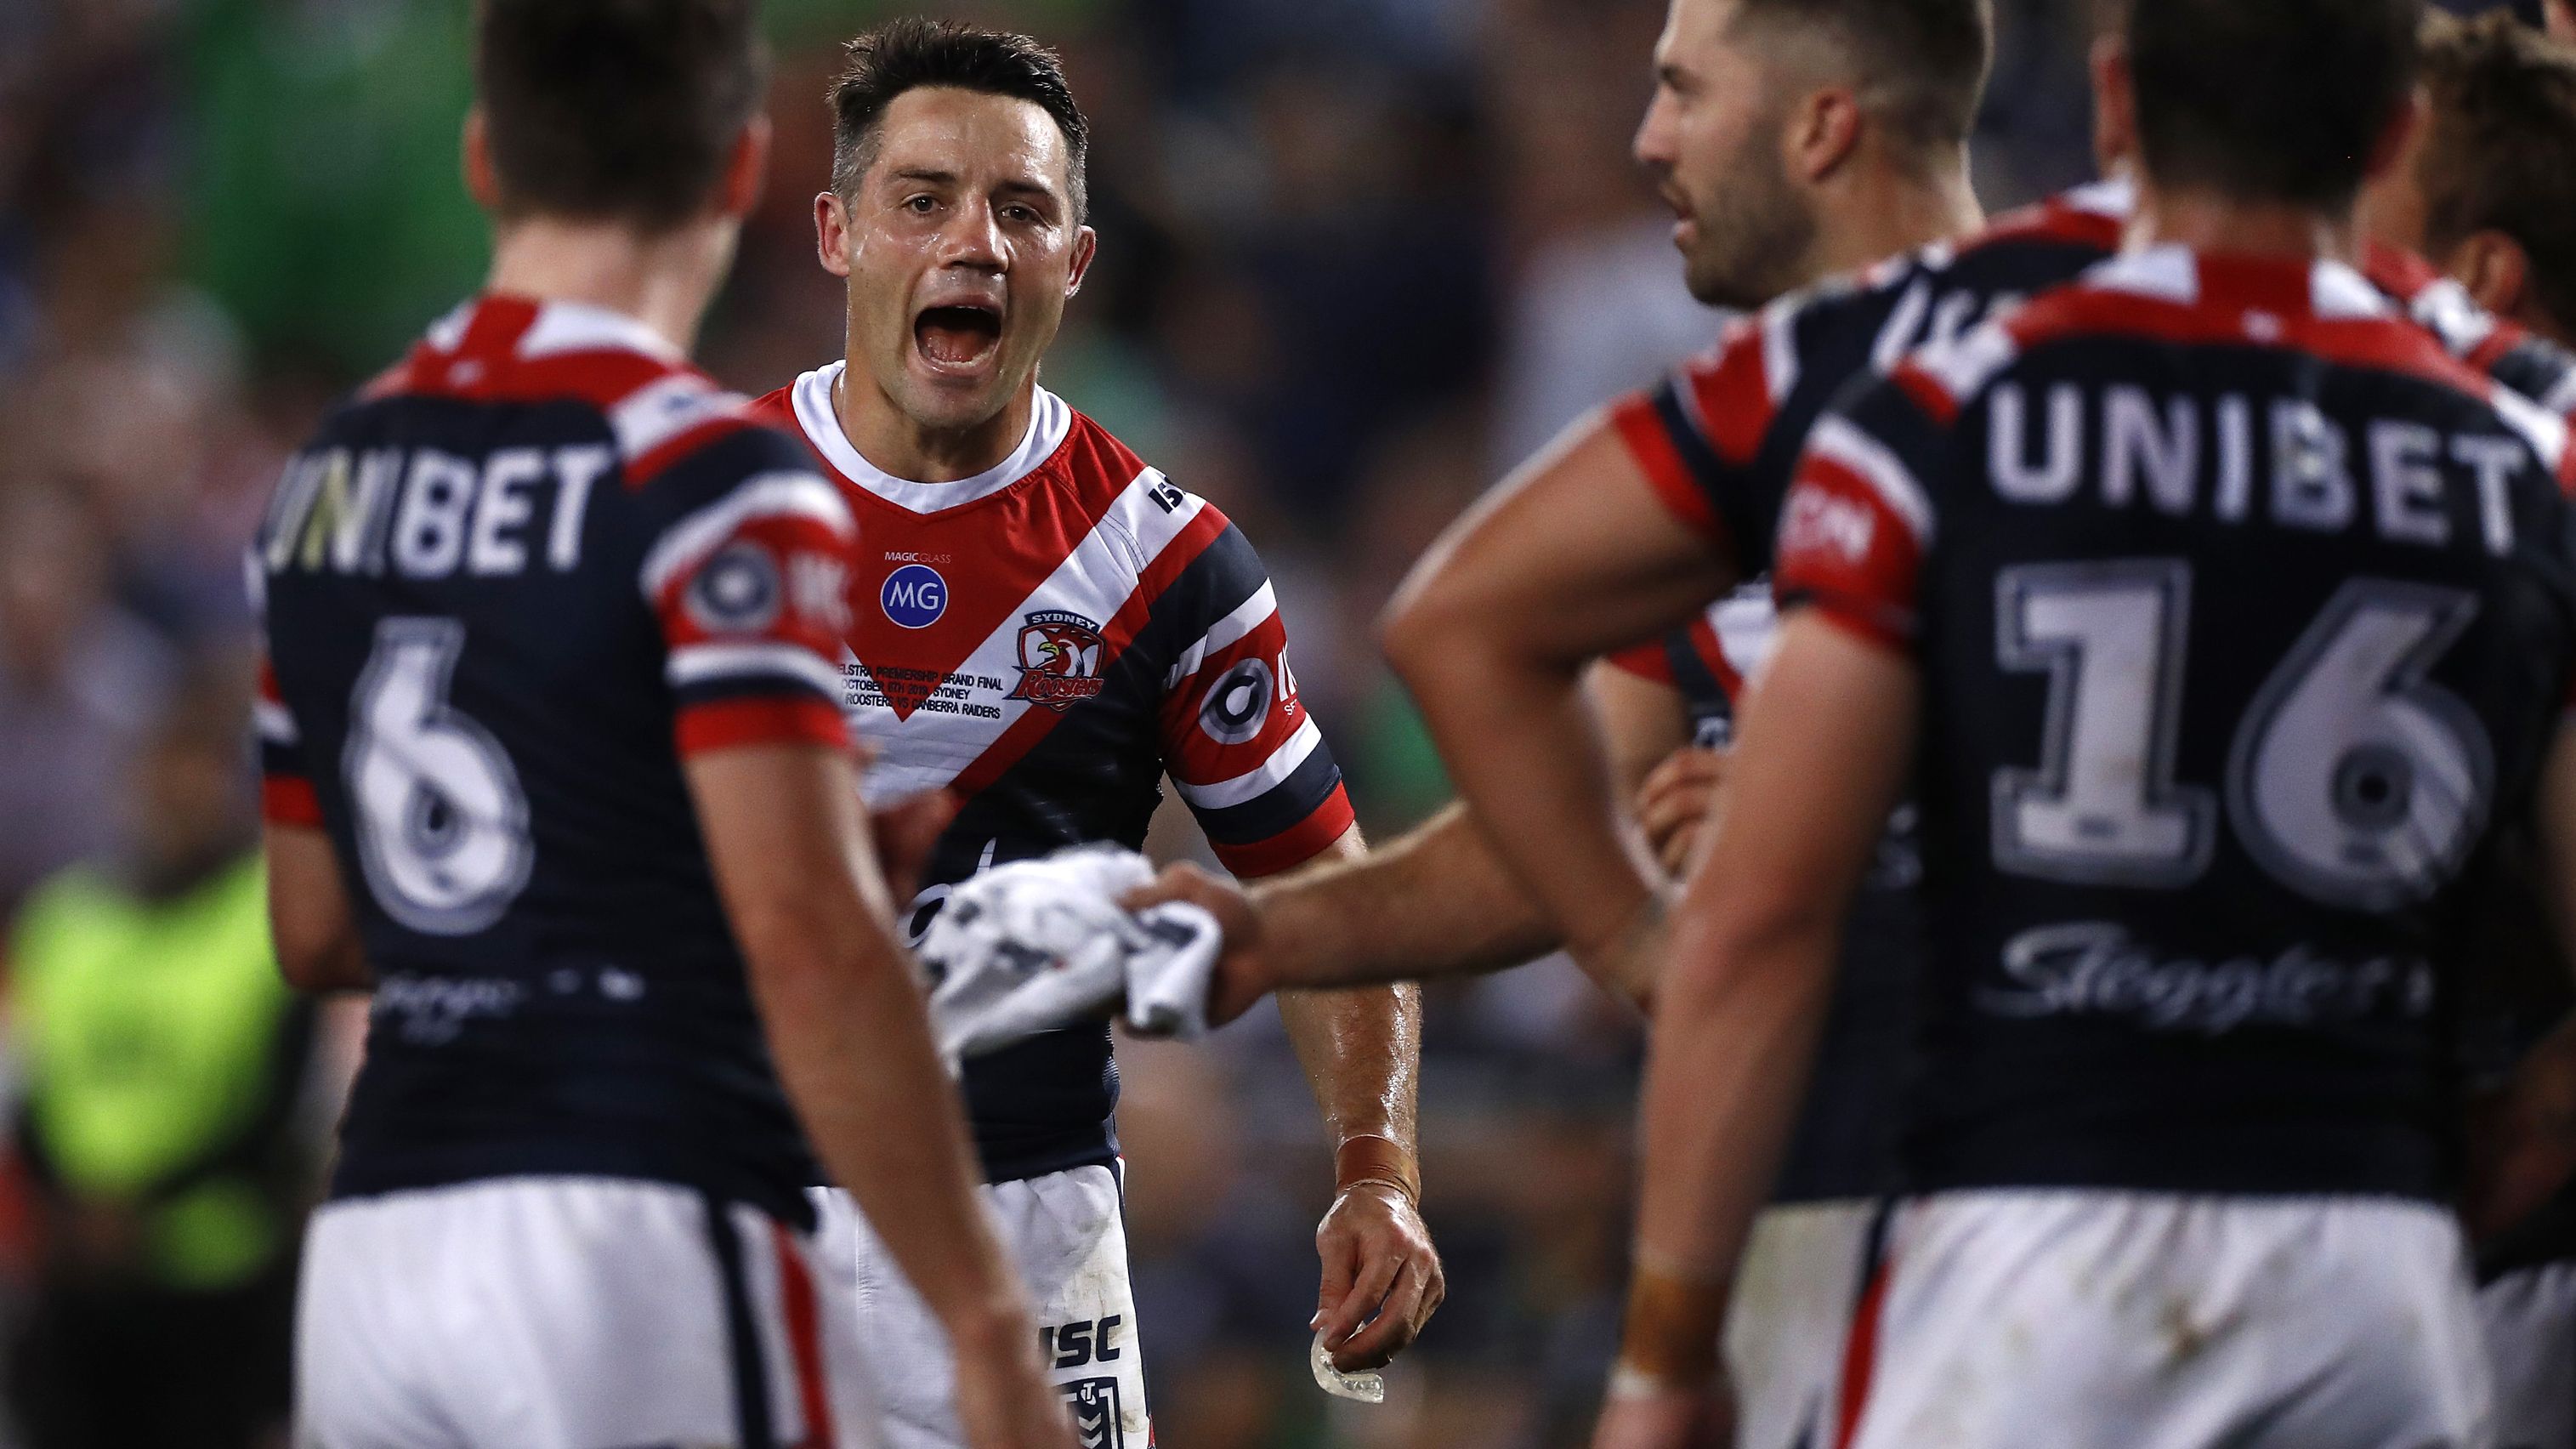 Cooper Cronk of the Roosters during the victorious 2019 grand final.